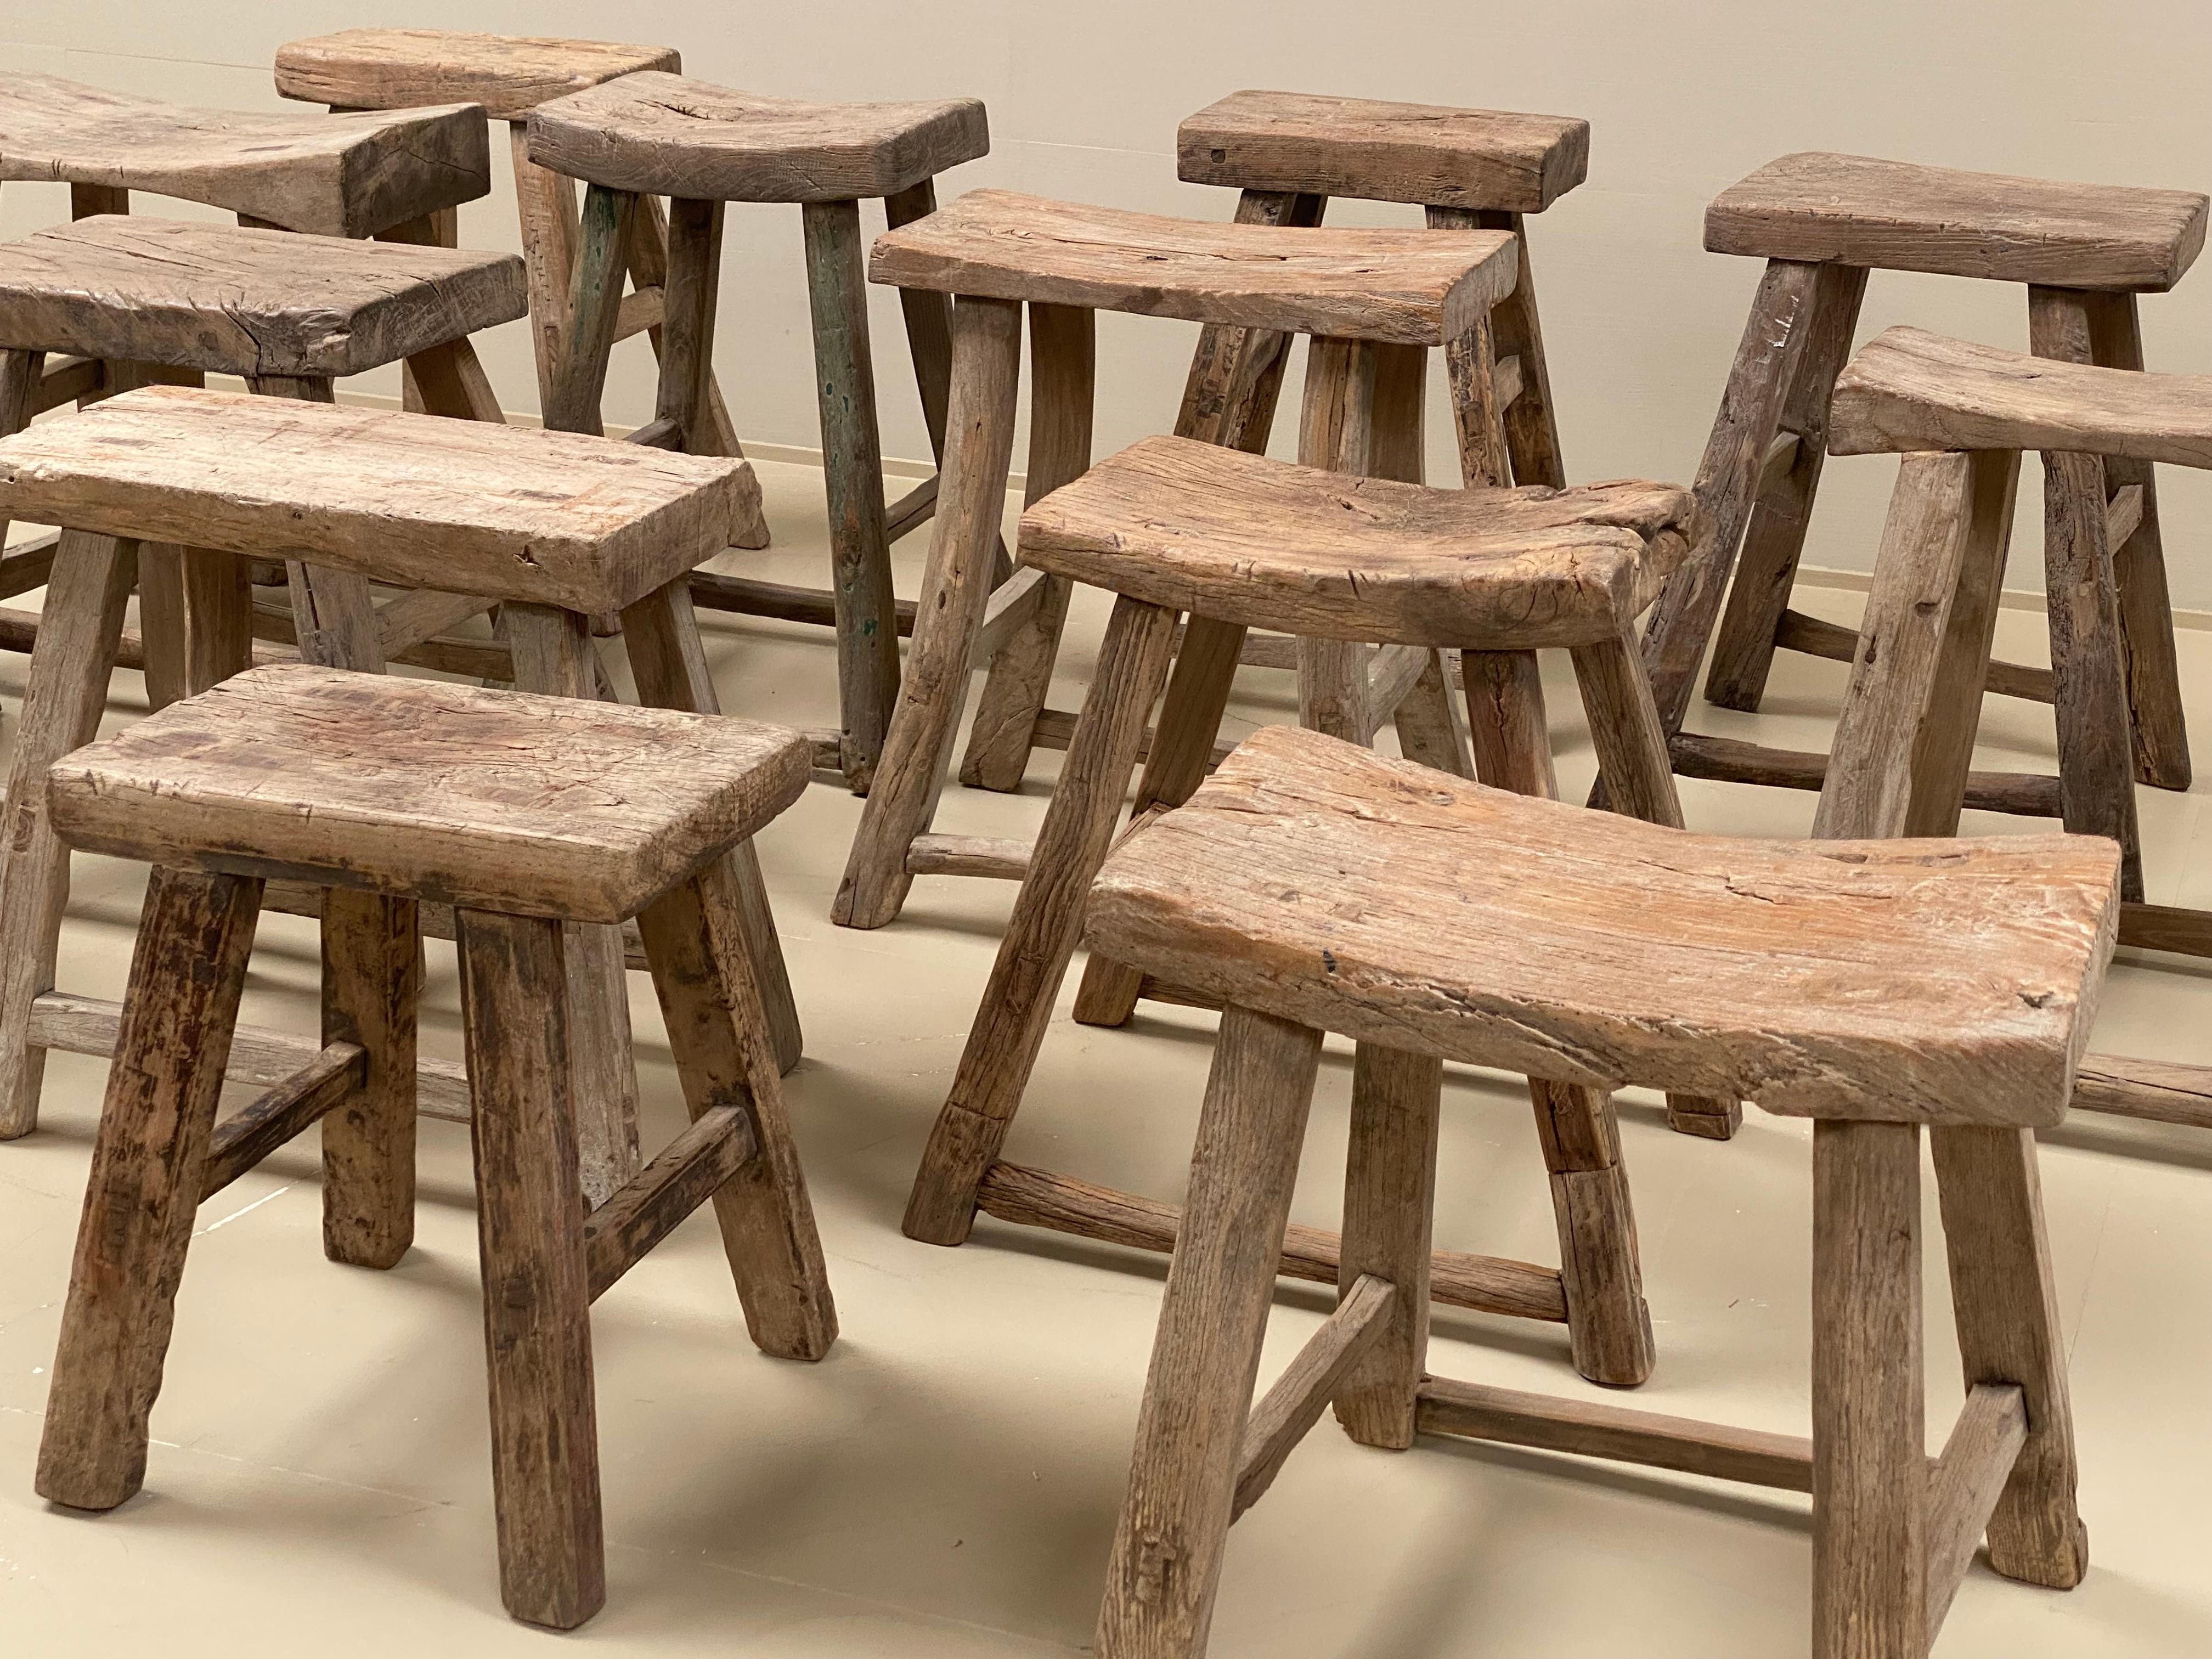 Collection of Chinese Wooden Elm Rectangular stools,
each piece is truly unique, some of them have traces of old paint,
beautiful old patina, warm and worn finish of the wood,
the stools can be used for seating or as a side table; great for any